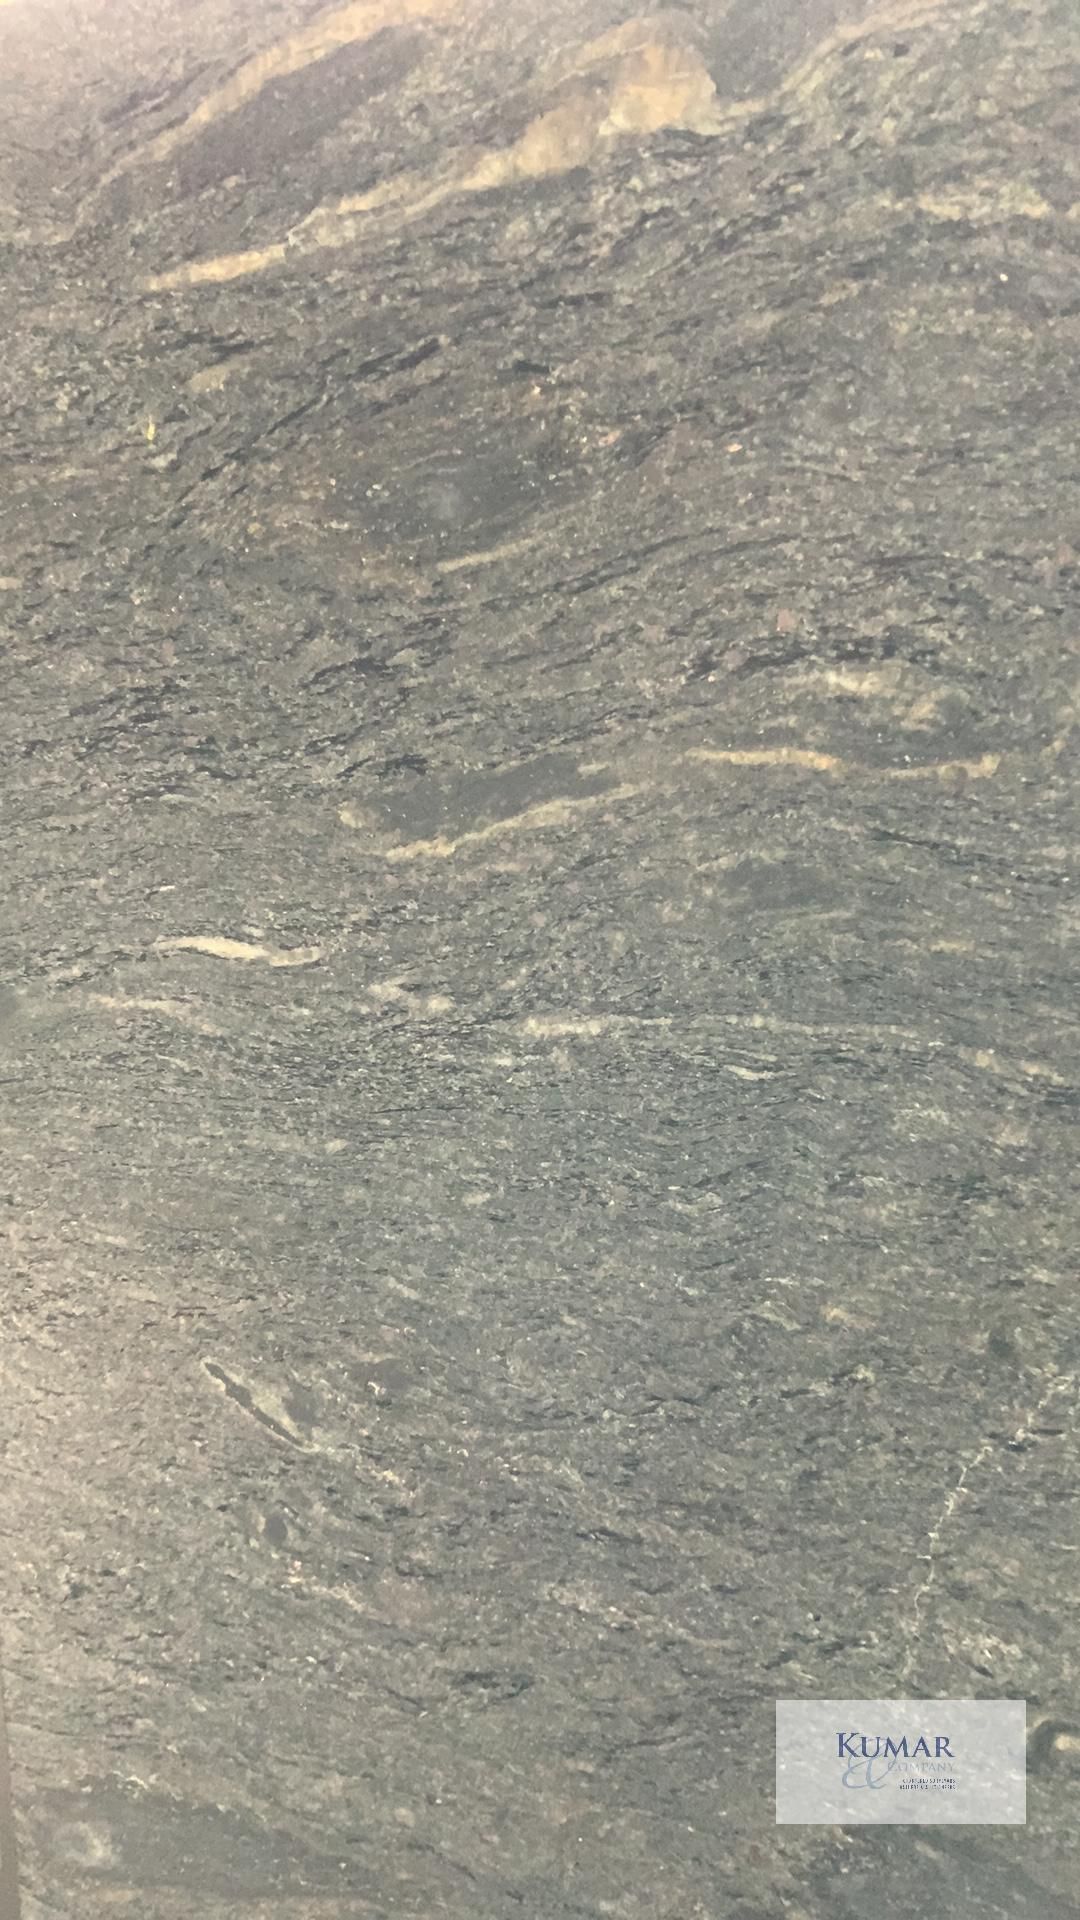 Quantity of Italian Black Granite - Cost Price in Excess of £3,000 1 x 2890mm by 1220 by 30mm with - Image 6 of 7